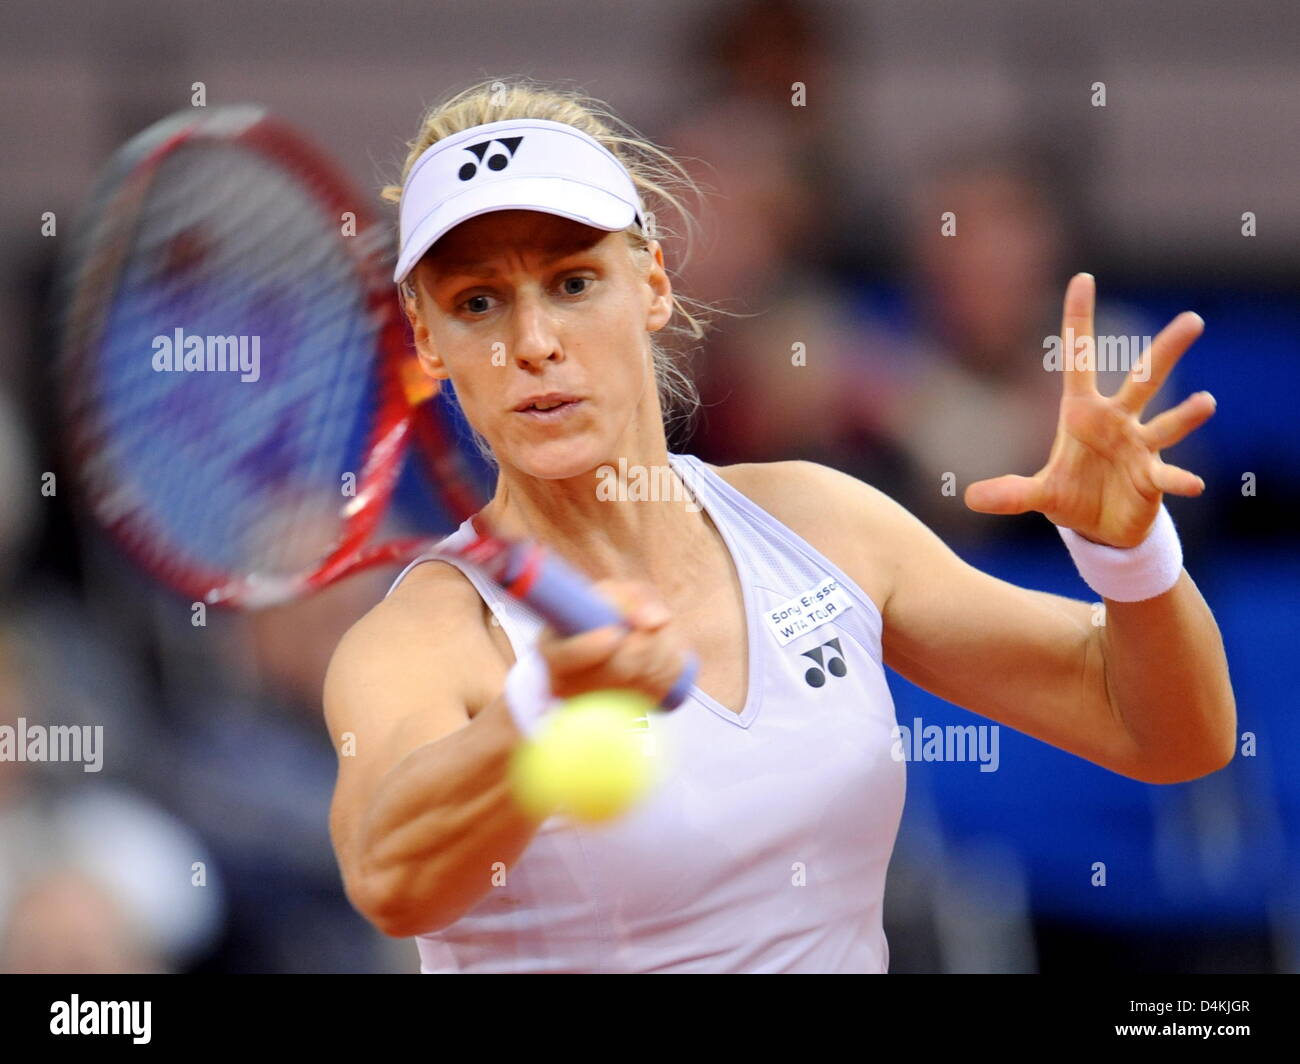 Russia?s Elena Dementieva returns a forehand to Hungary?s Agnes Szavay during their match at the Porsche Tennis Grand Prix in Stuttgart, Germany, 30 April 2009. Photo: BERND WEISSBROD Stock Photo